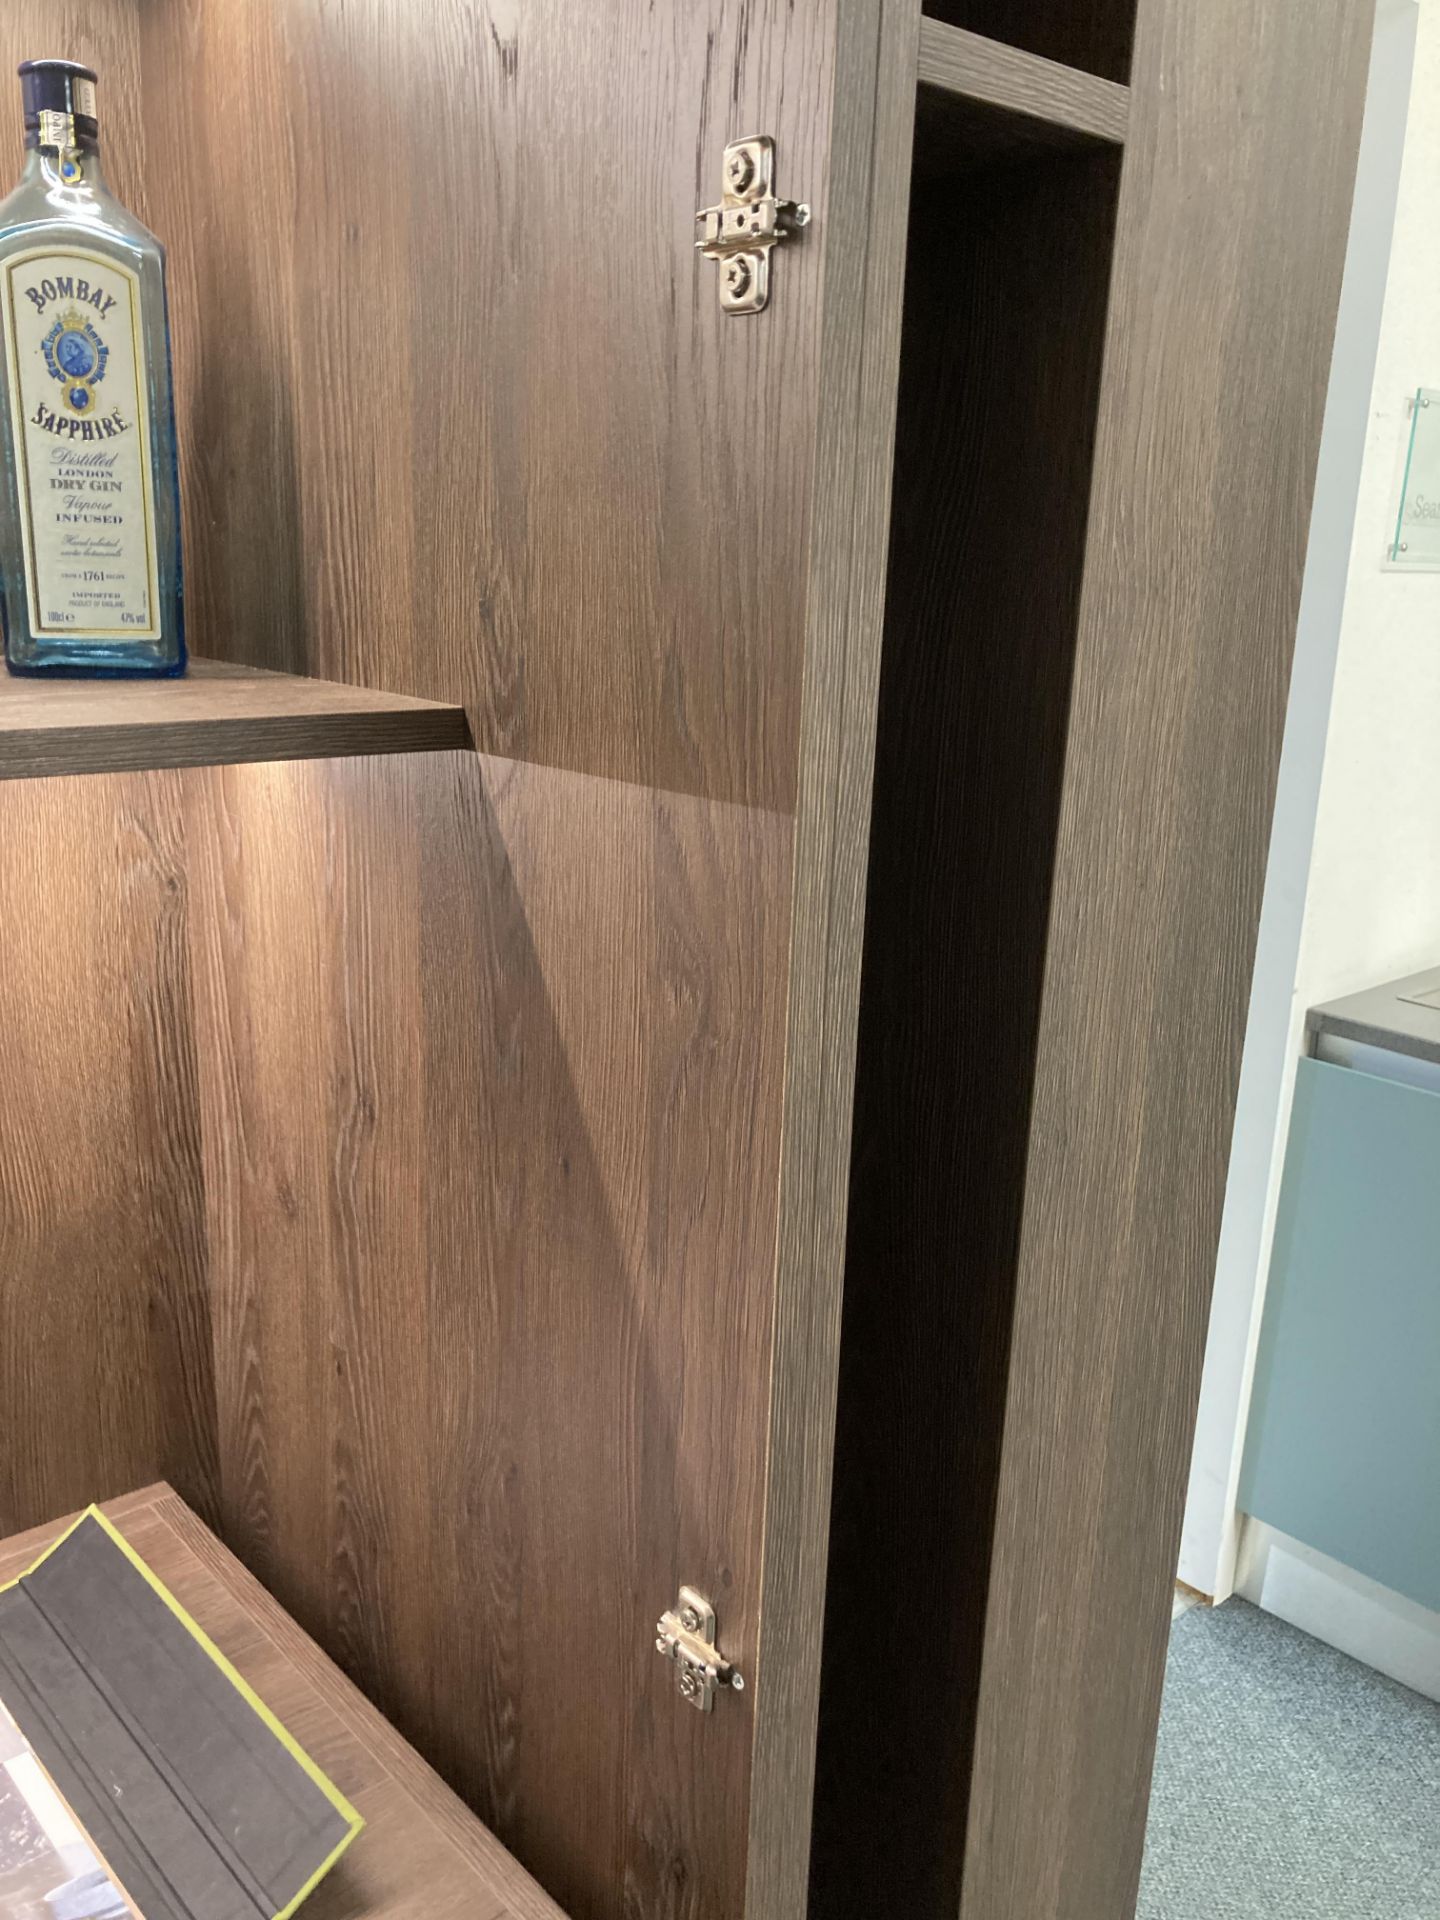 Drinks cabinet display without doors - Image 3 of 4